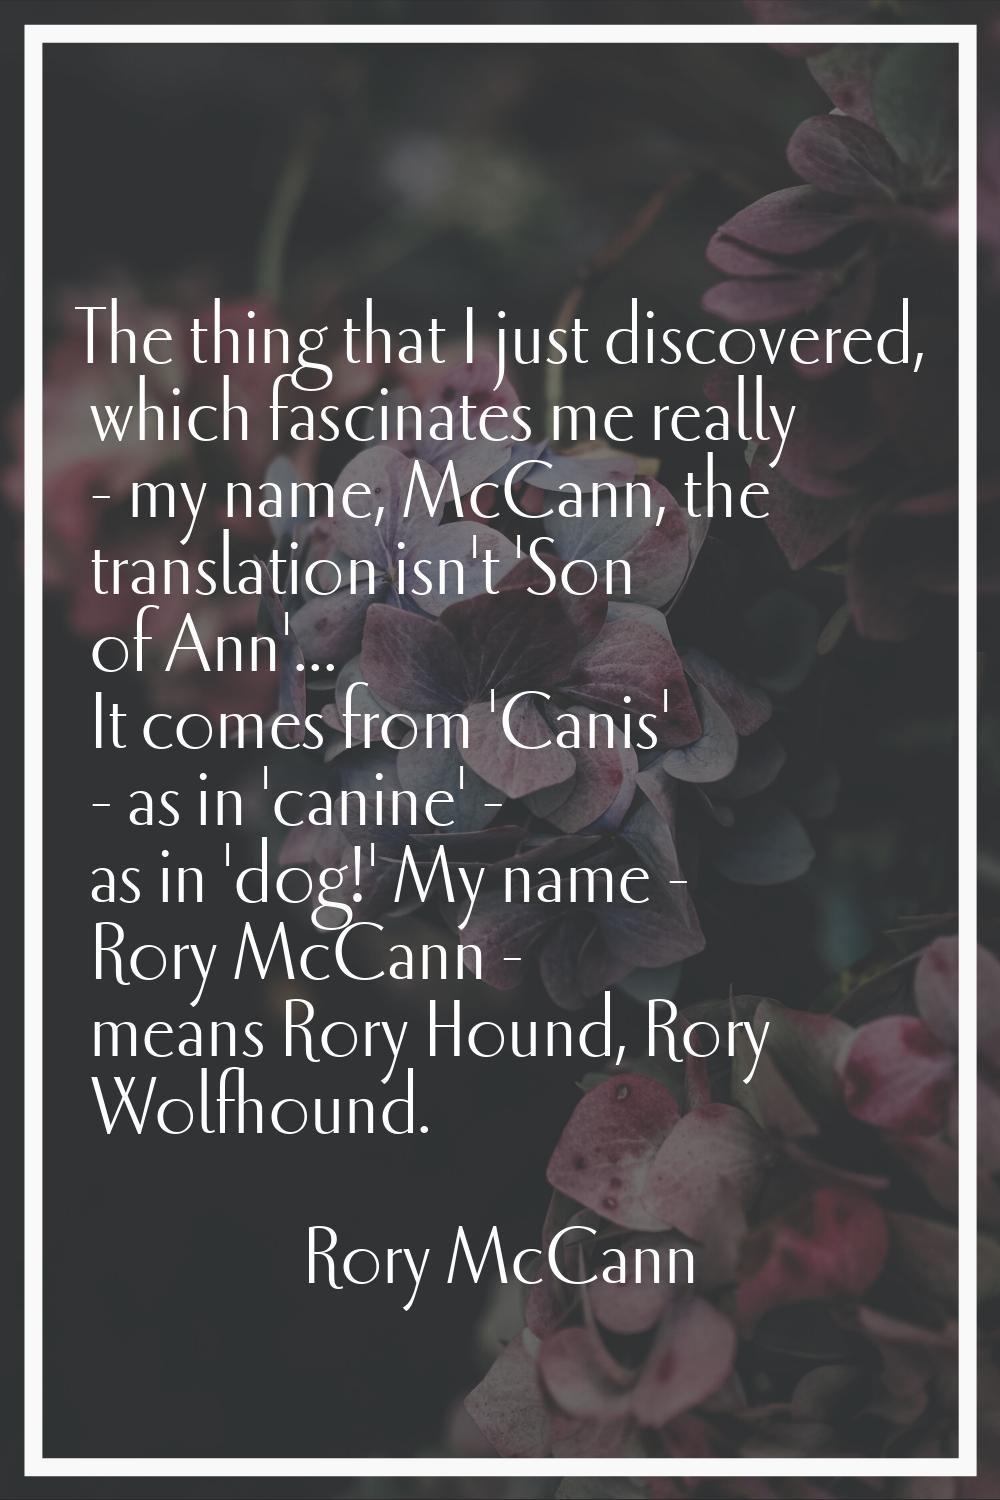 The thing that I just discovered, which fascinates me really - my name, McCann, the translation isn